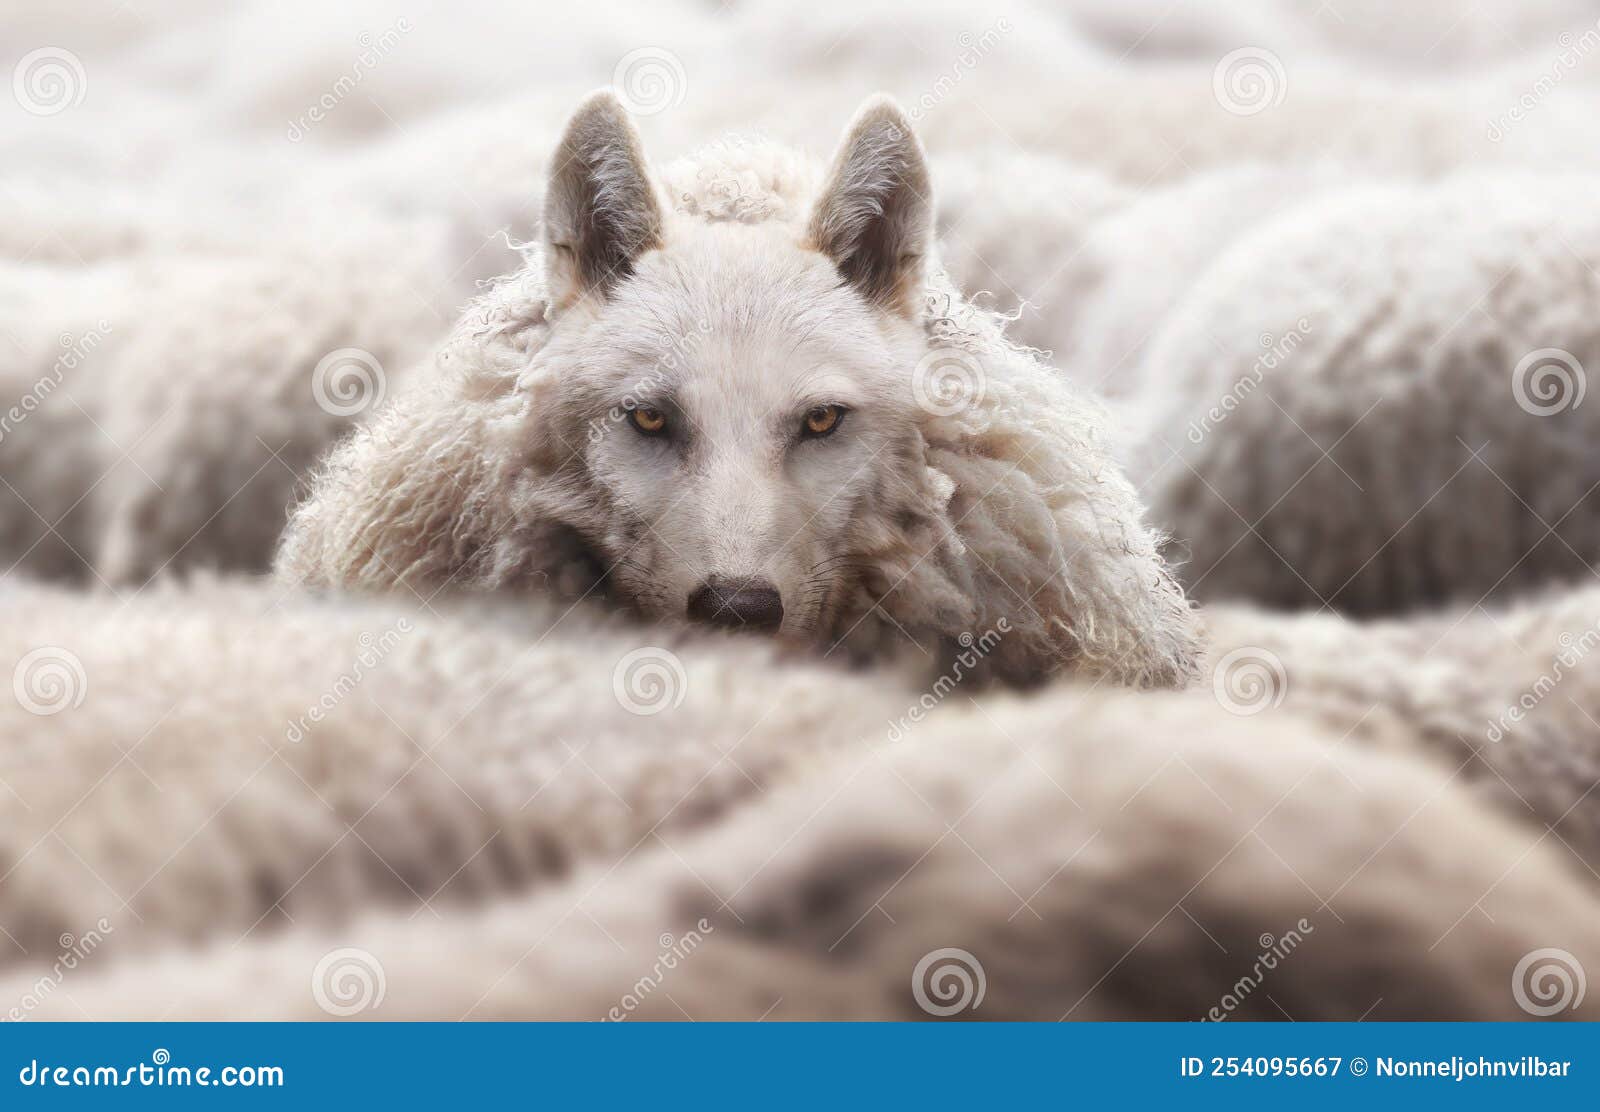 wolf in a flock of sheep with wool clothing